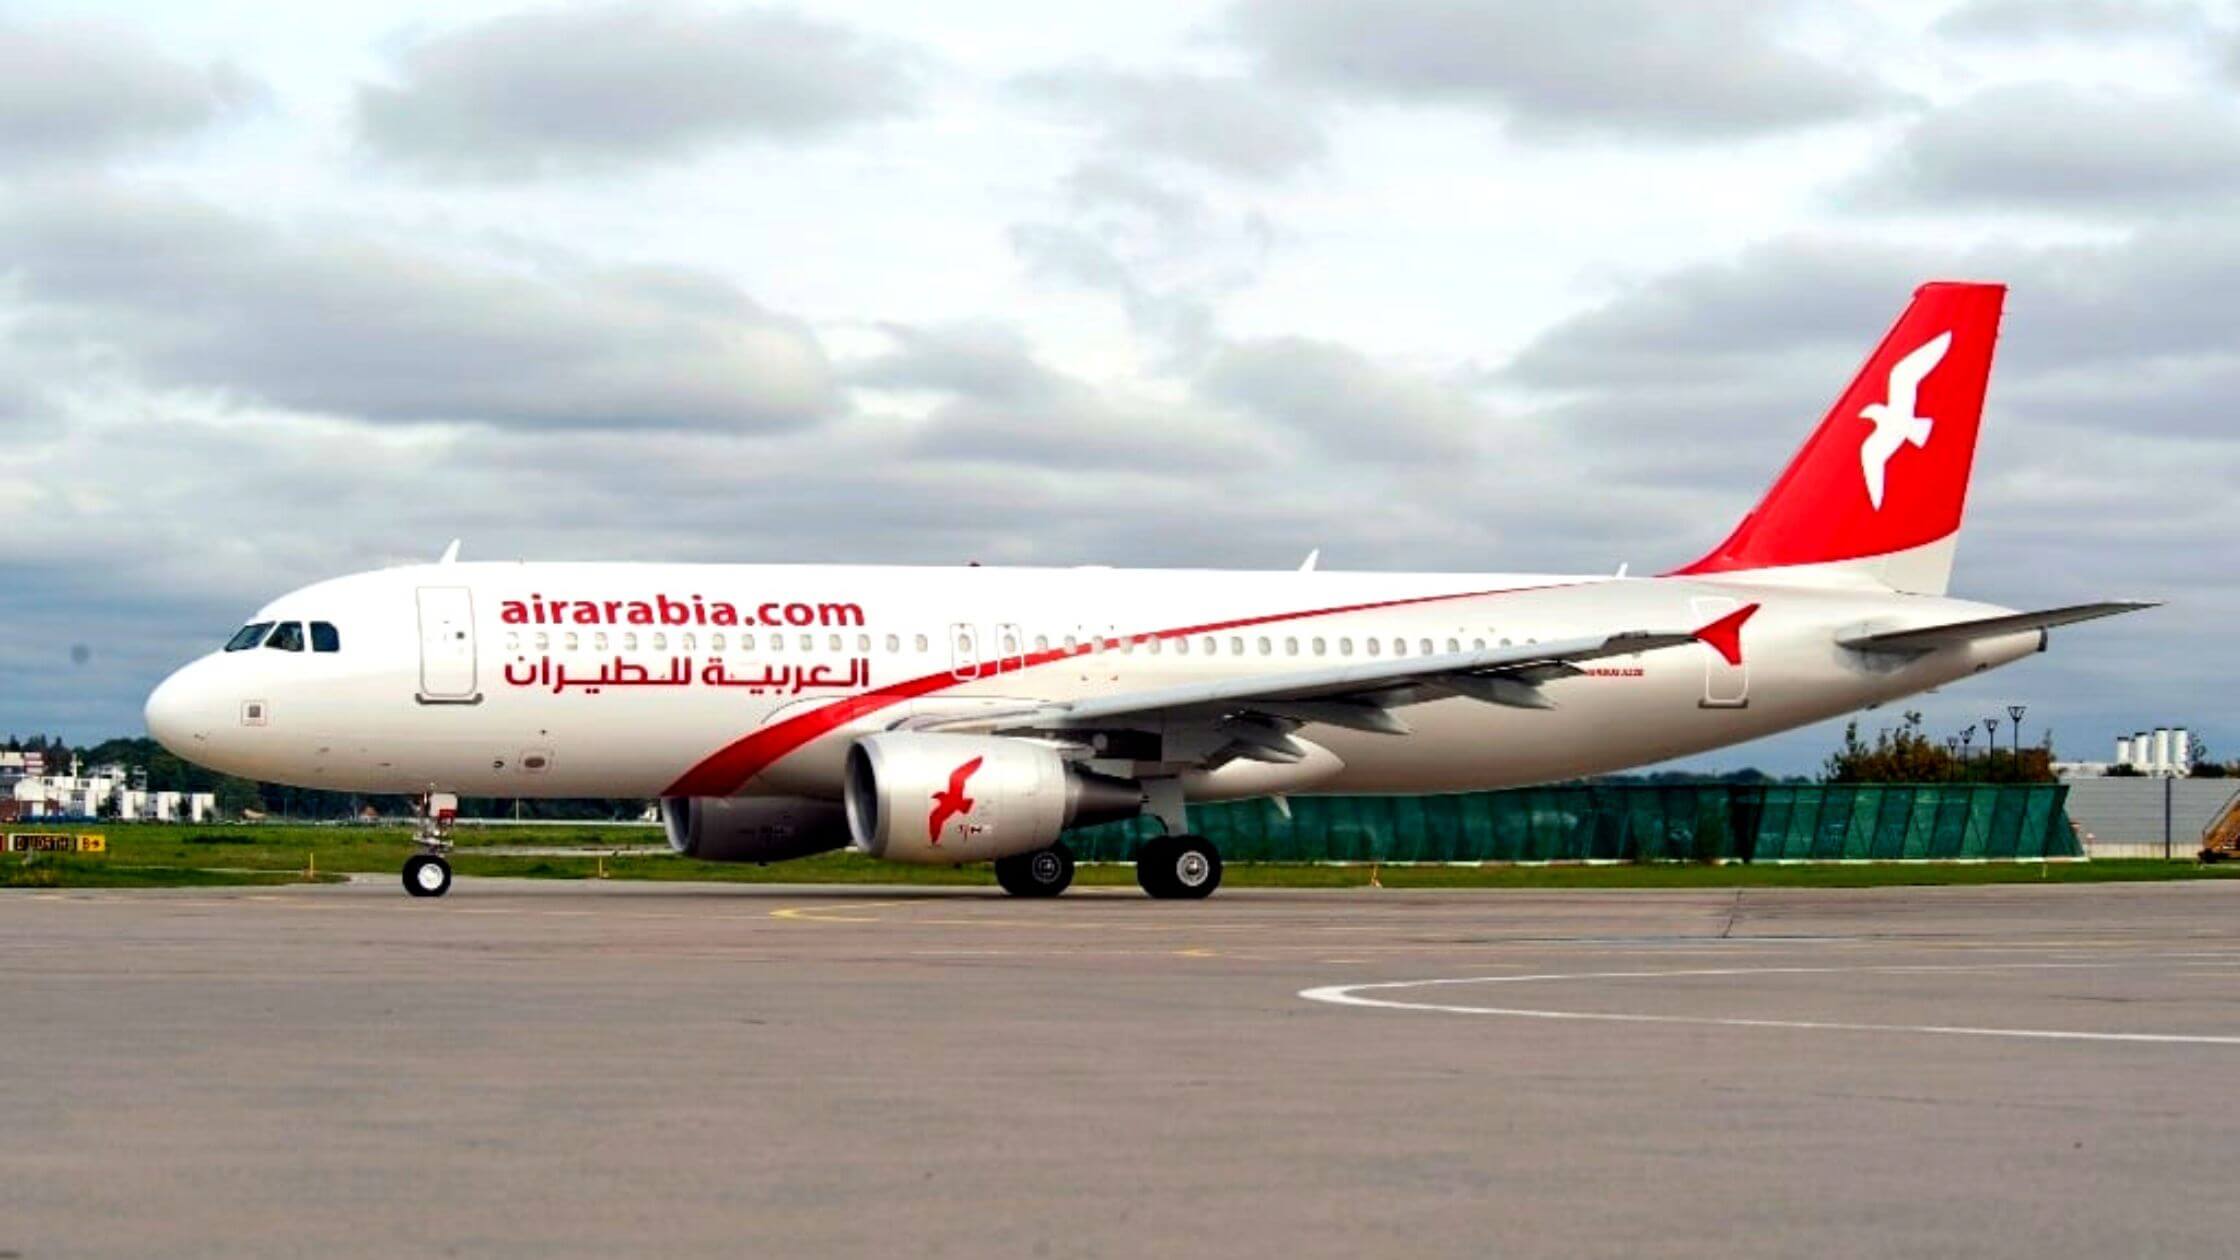 Surge In The Number Of Passengers For Air Arabia